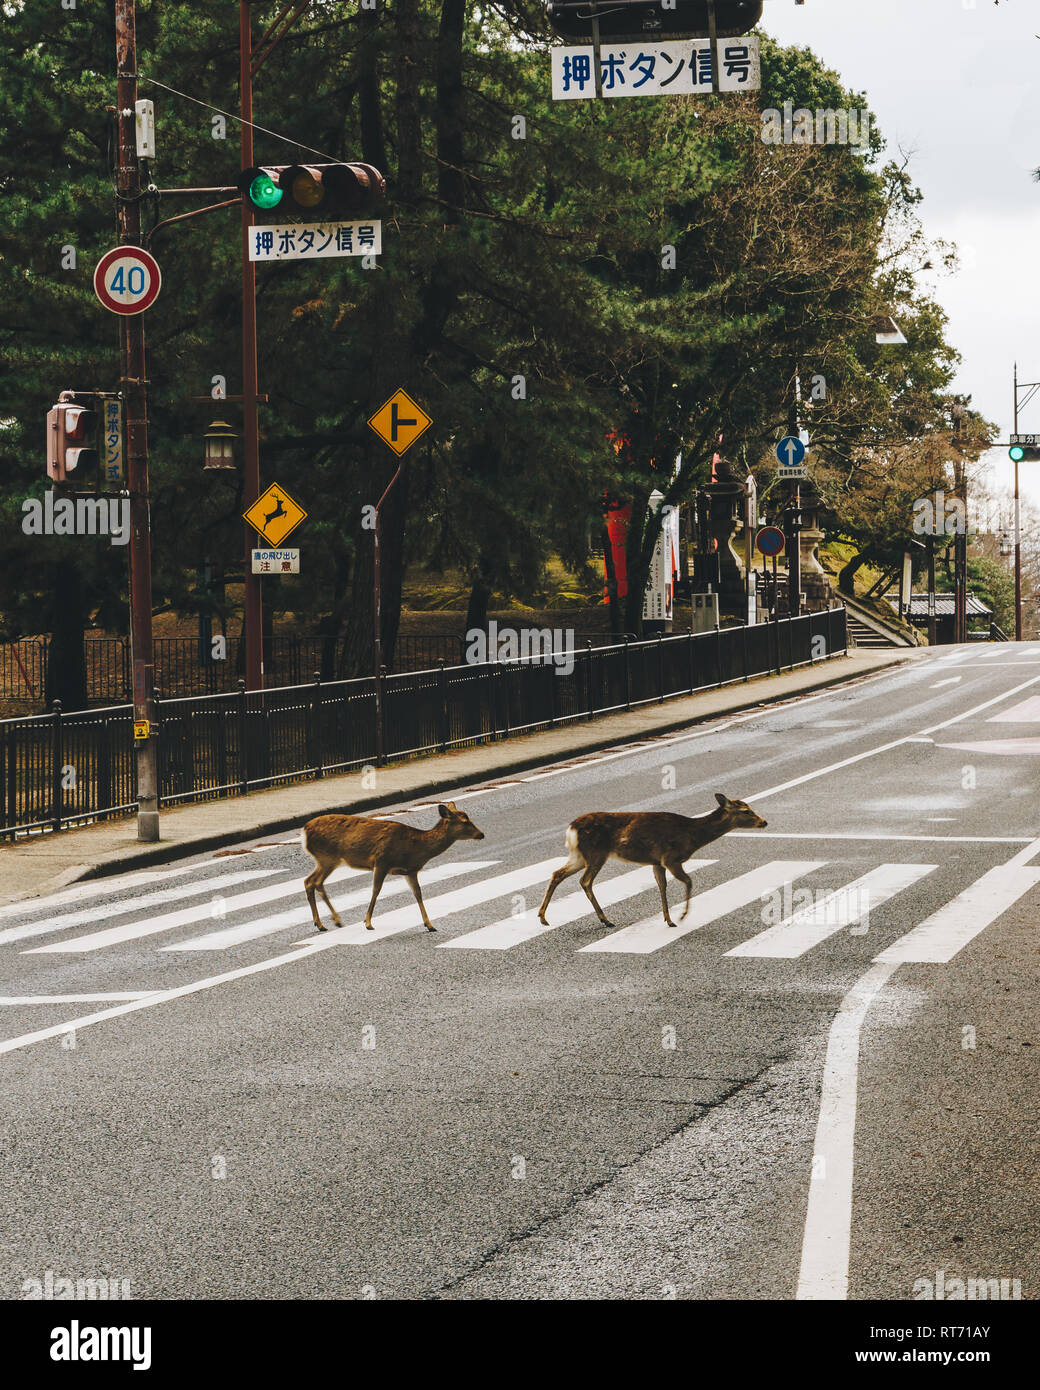 2 deer crossing the road at a road crossing in Nara, Japan. The signs read Warning- Deer and Traffic Lights. Stock Photo